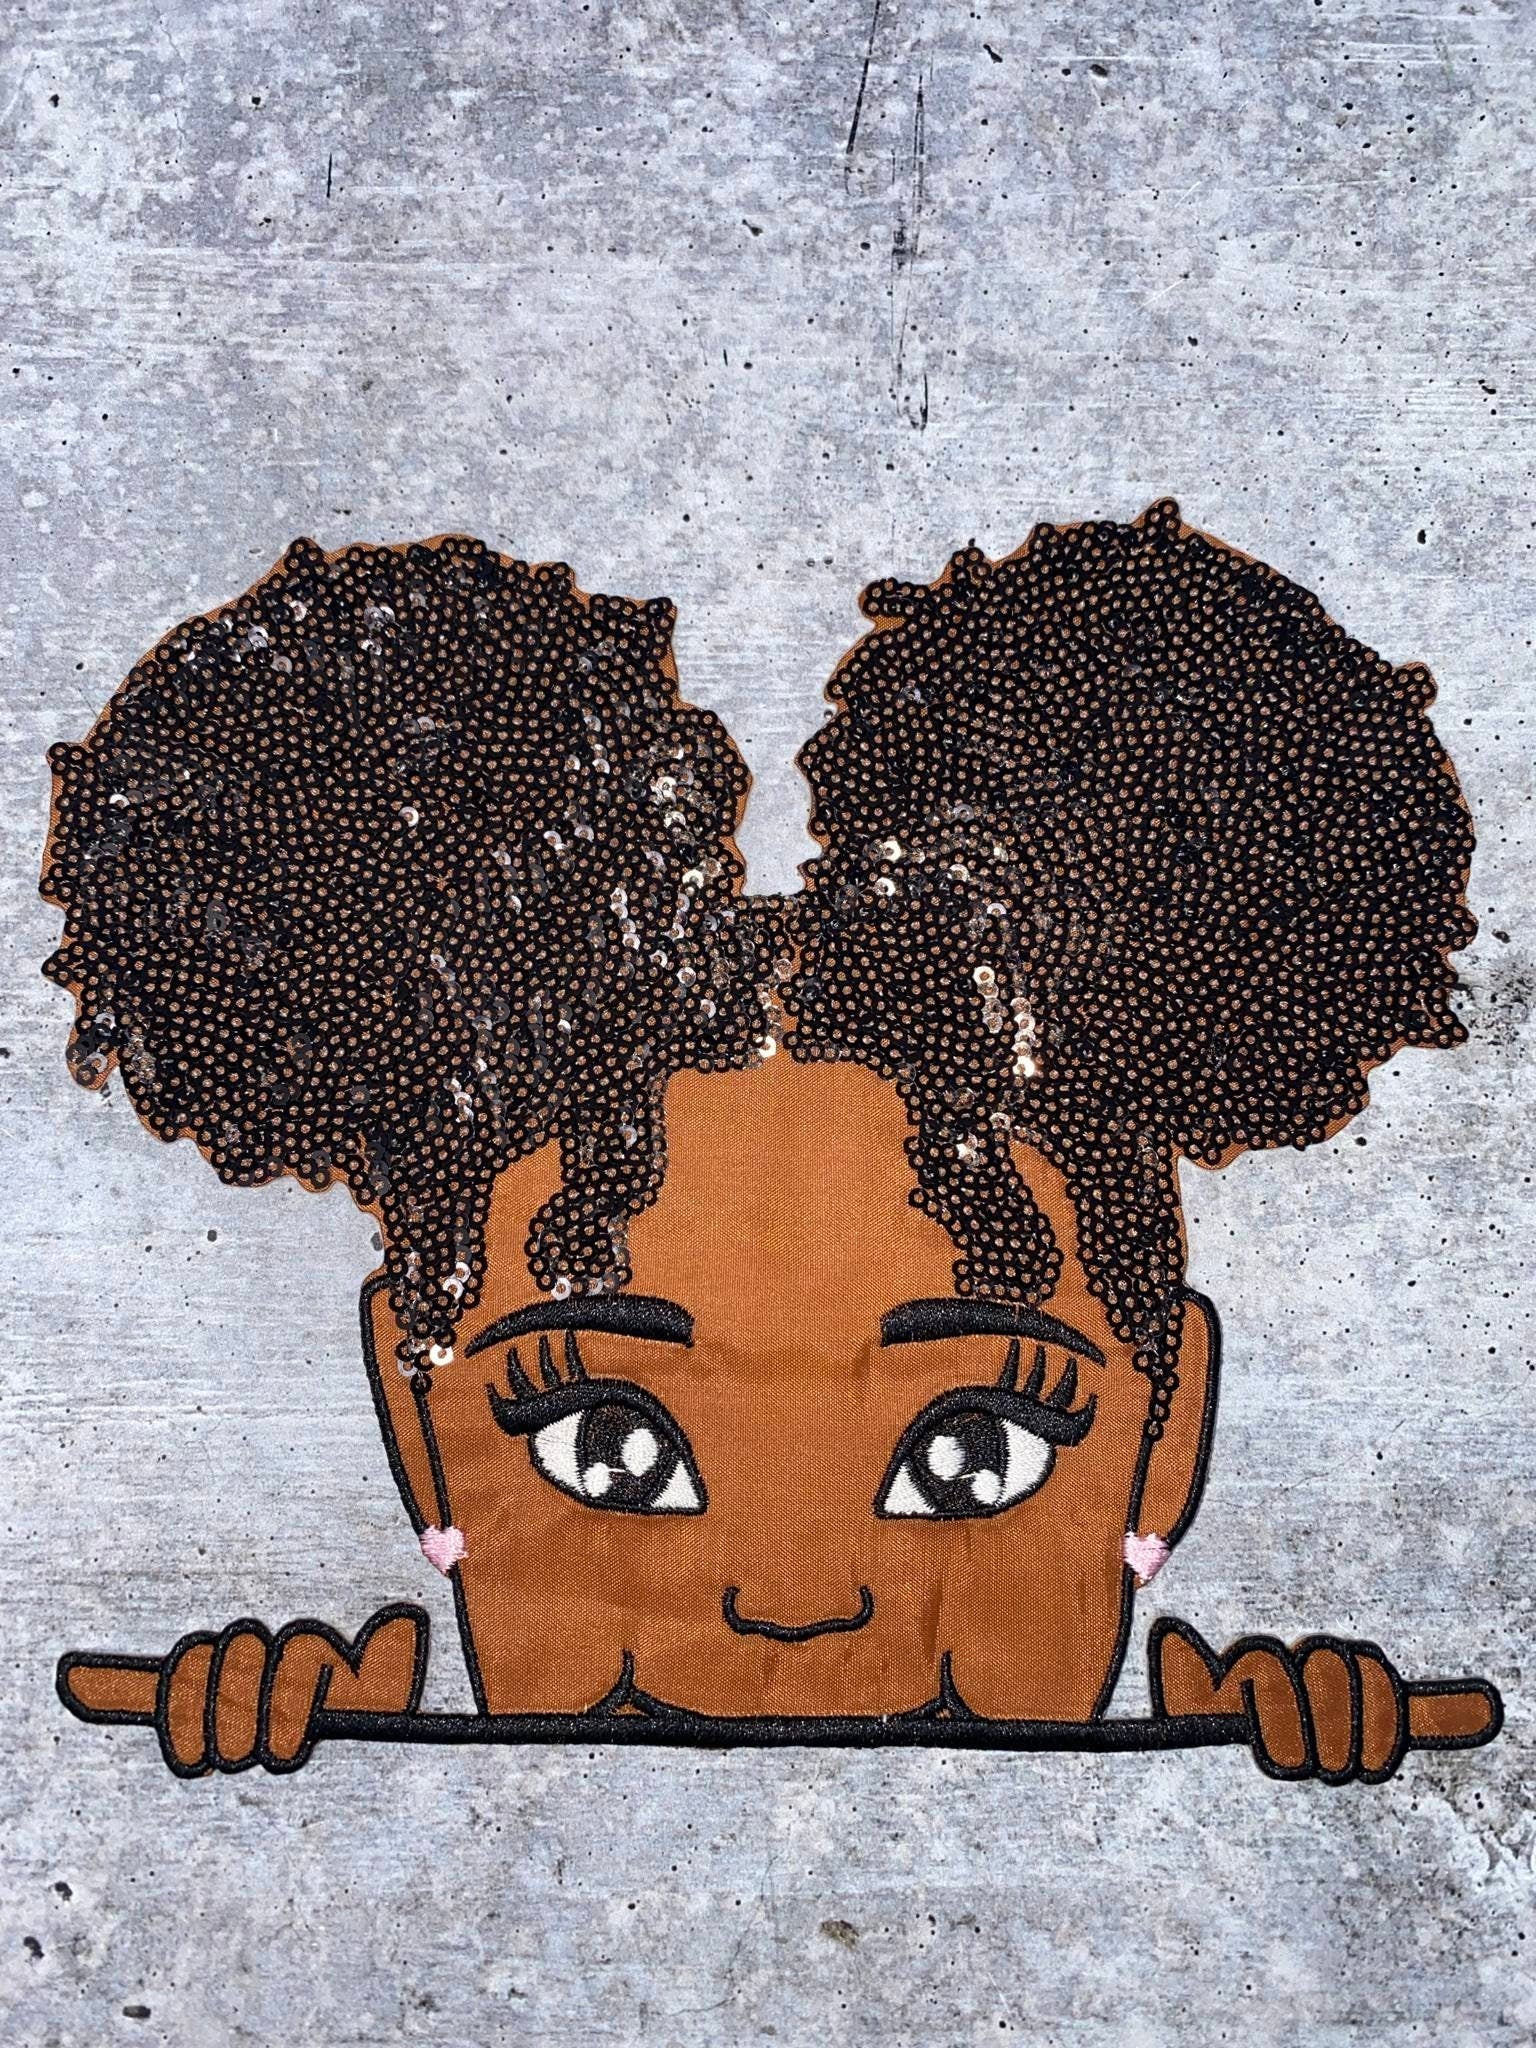 New, SEQUINS & Satin Peek-a-boo "Lisa" with Afro Puffs, Size 7"x7.6" Patch, Iron-on/Sew-on, Patch for Girls Jacket, Bling Patch